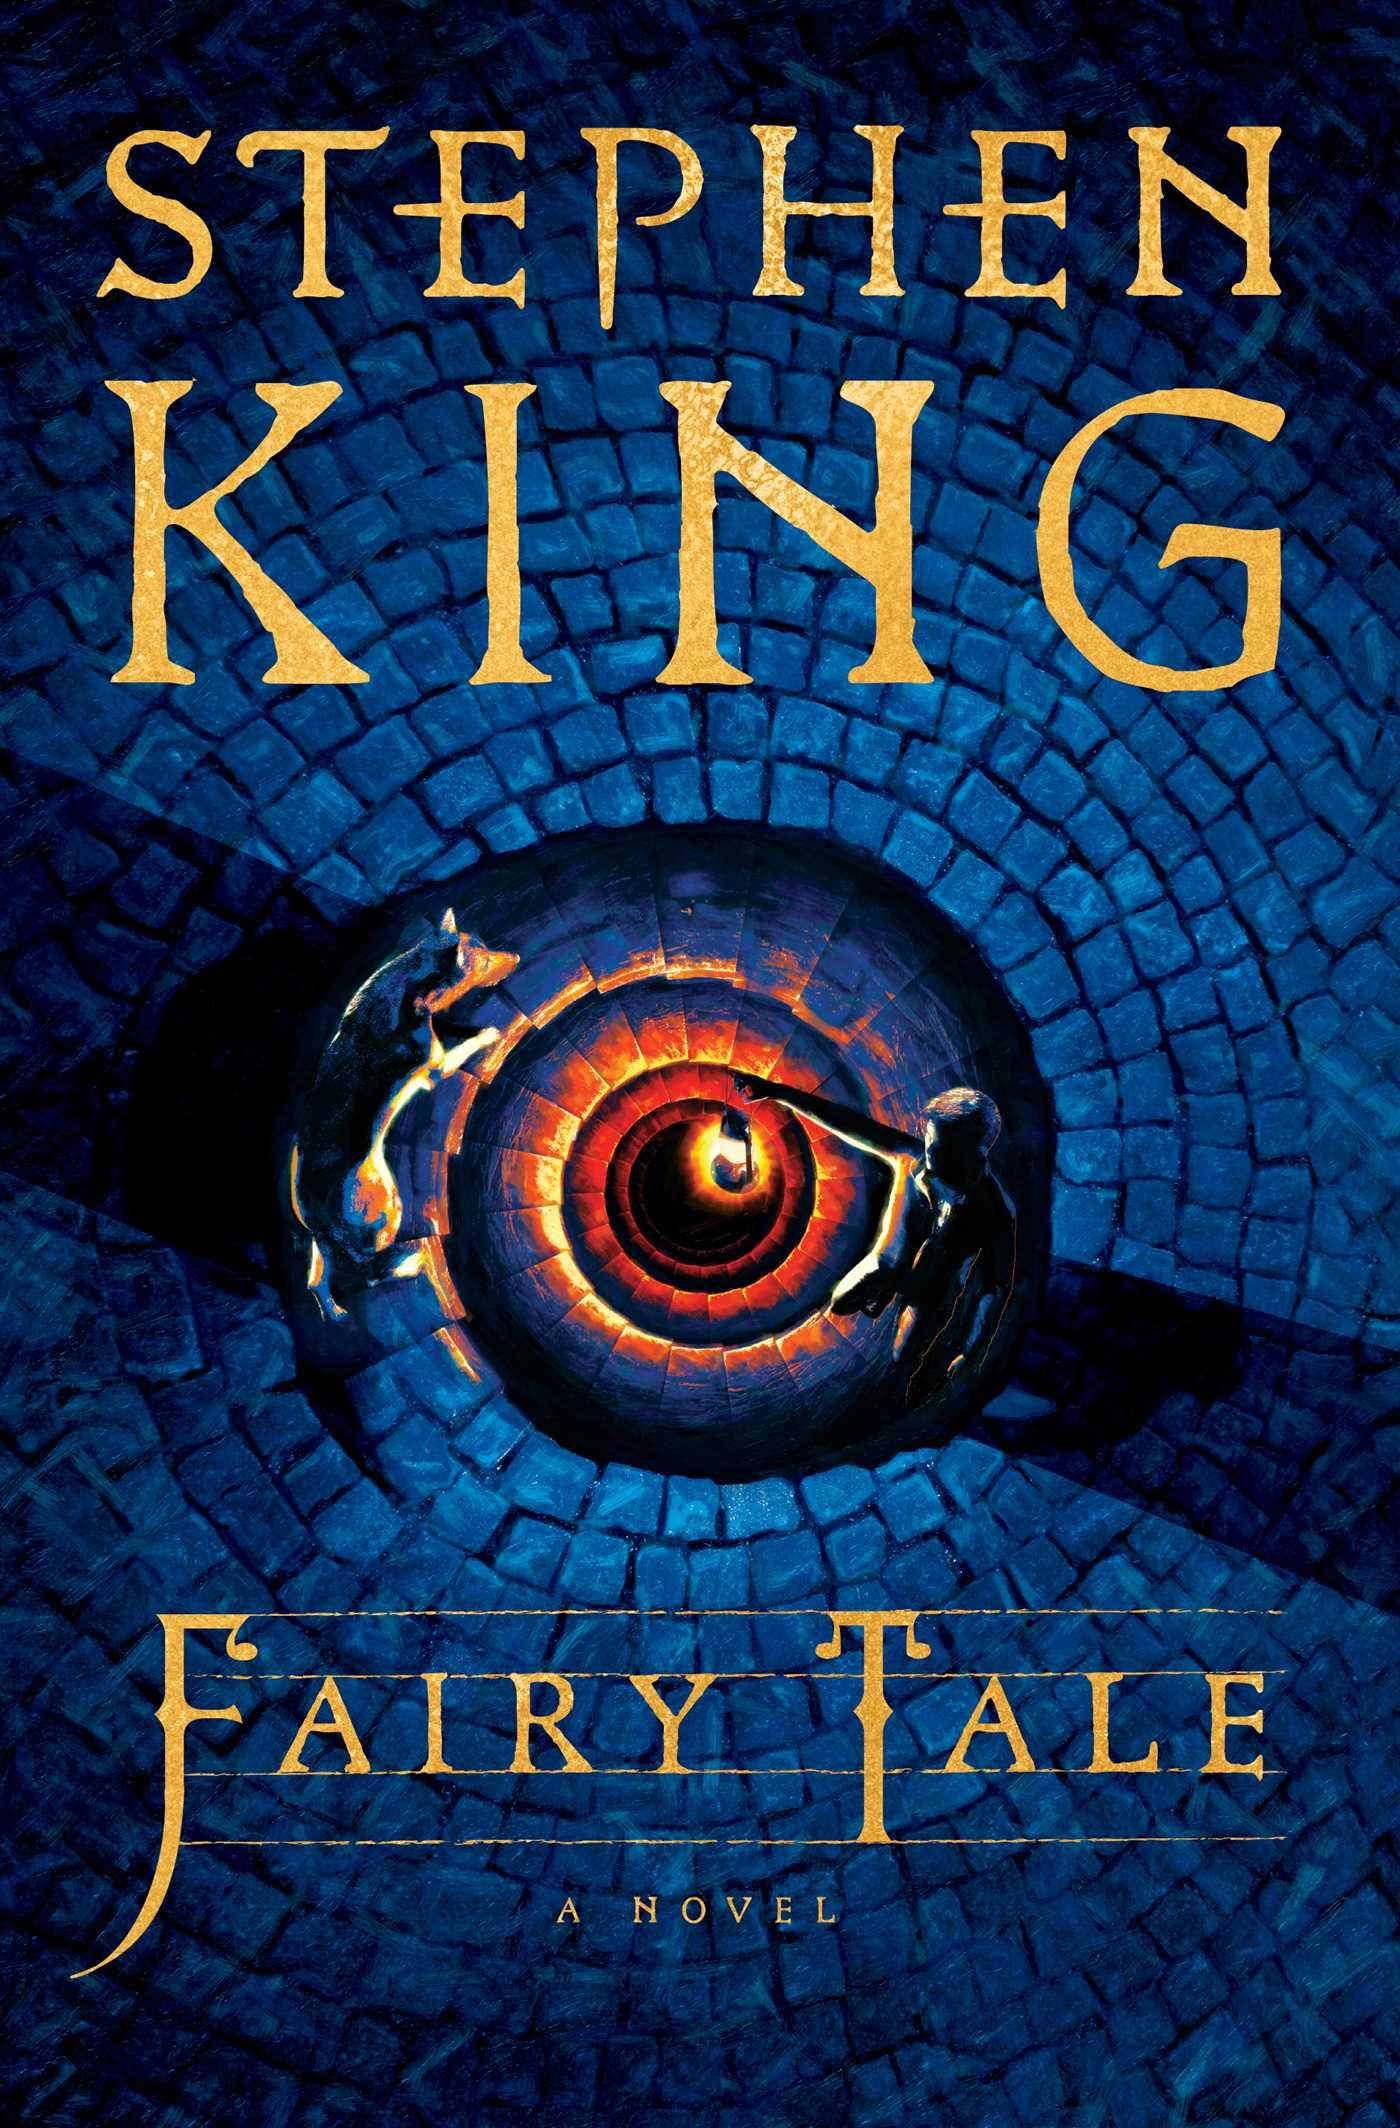 Stephen King's New Novel ‘Fairy Tale’ has been Released